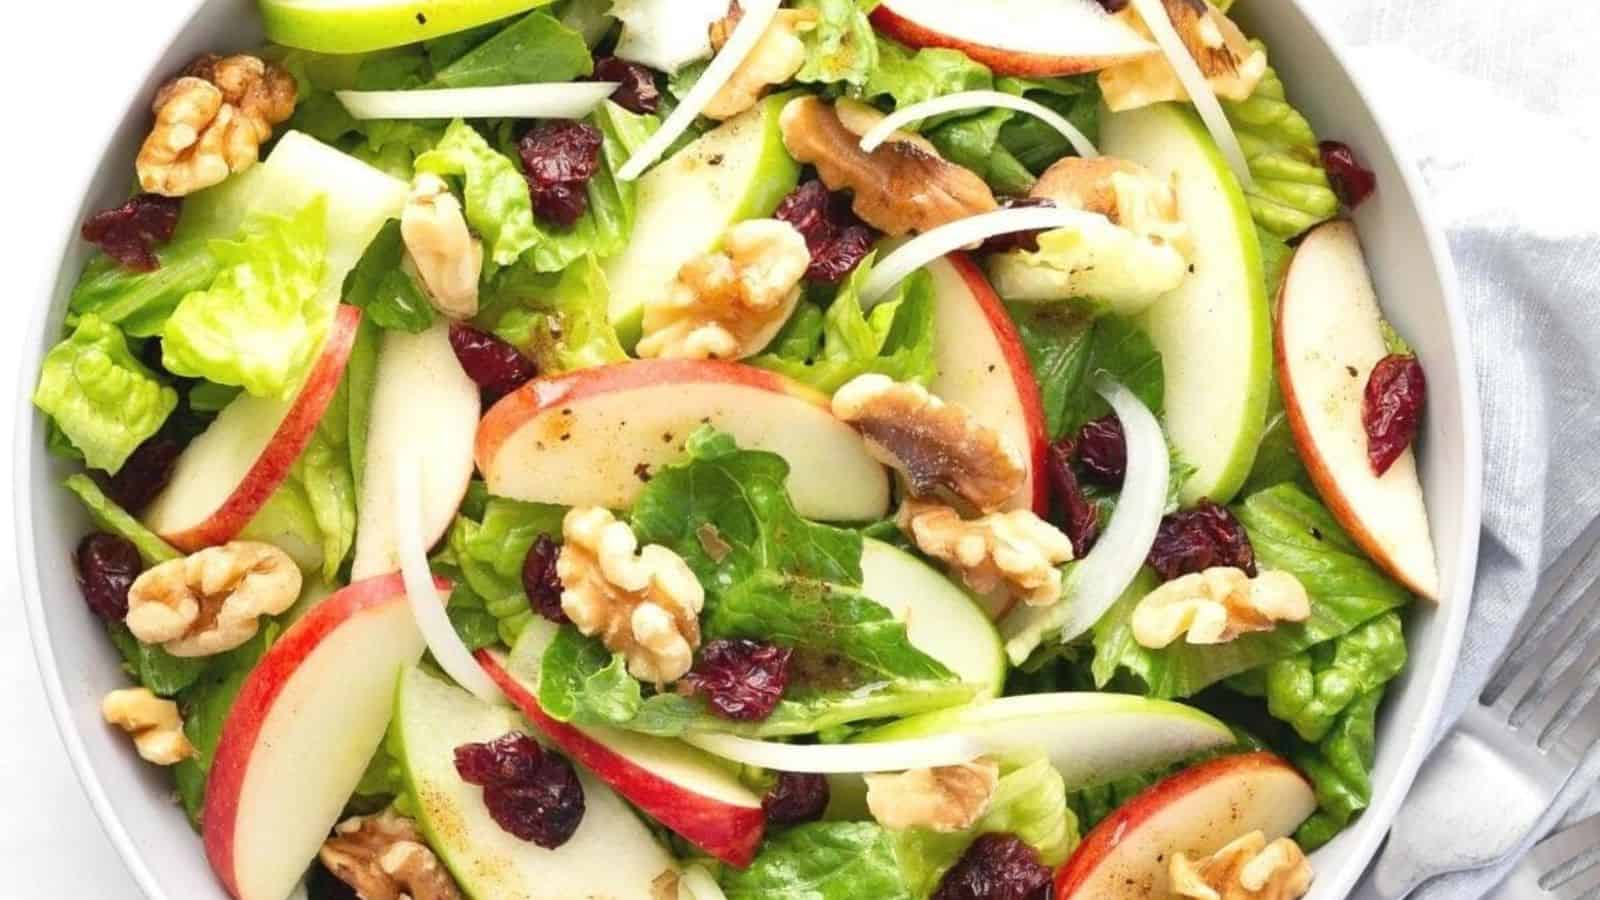 A fresh apple cranberry salad with a bright red and green color.